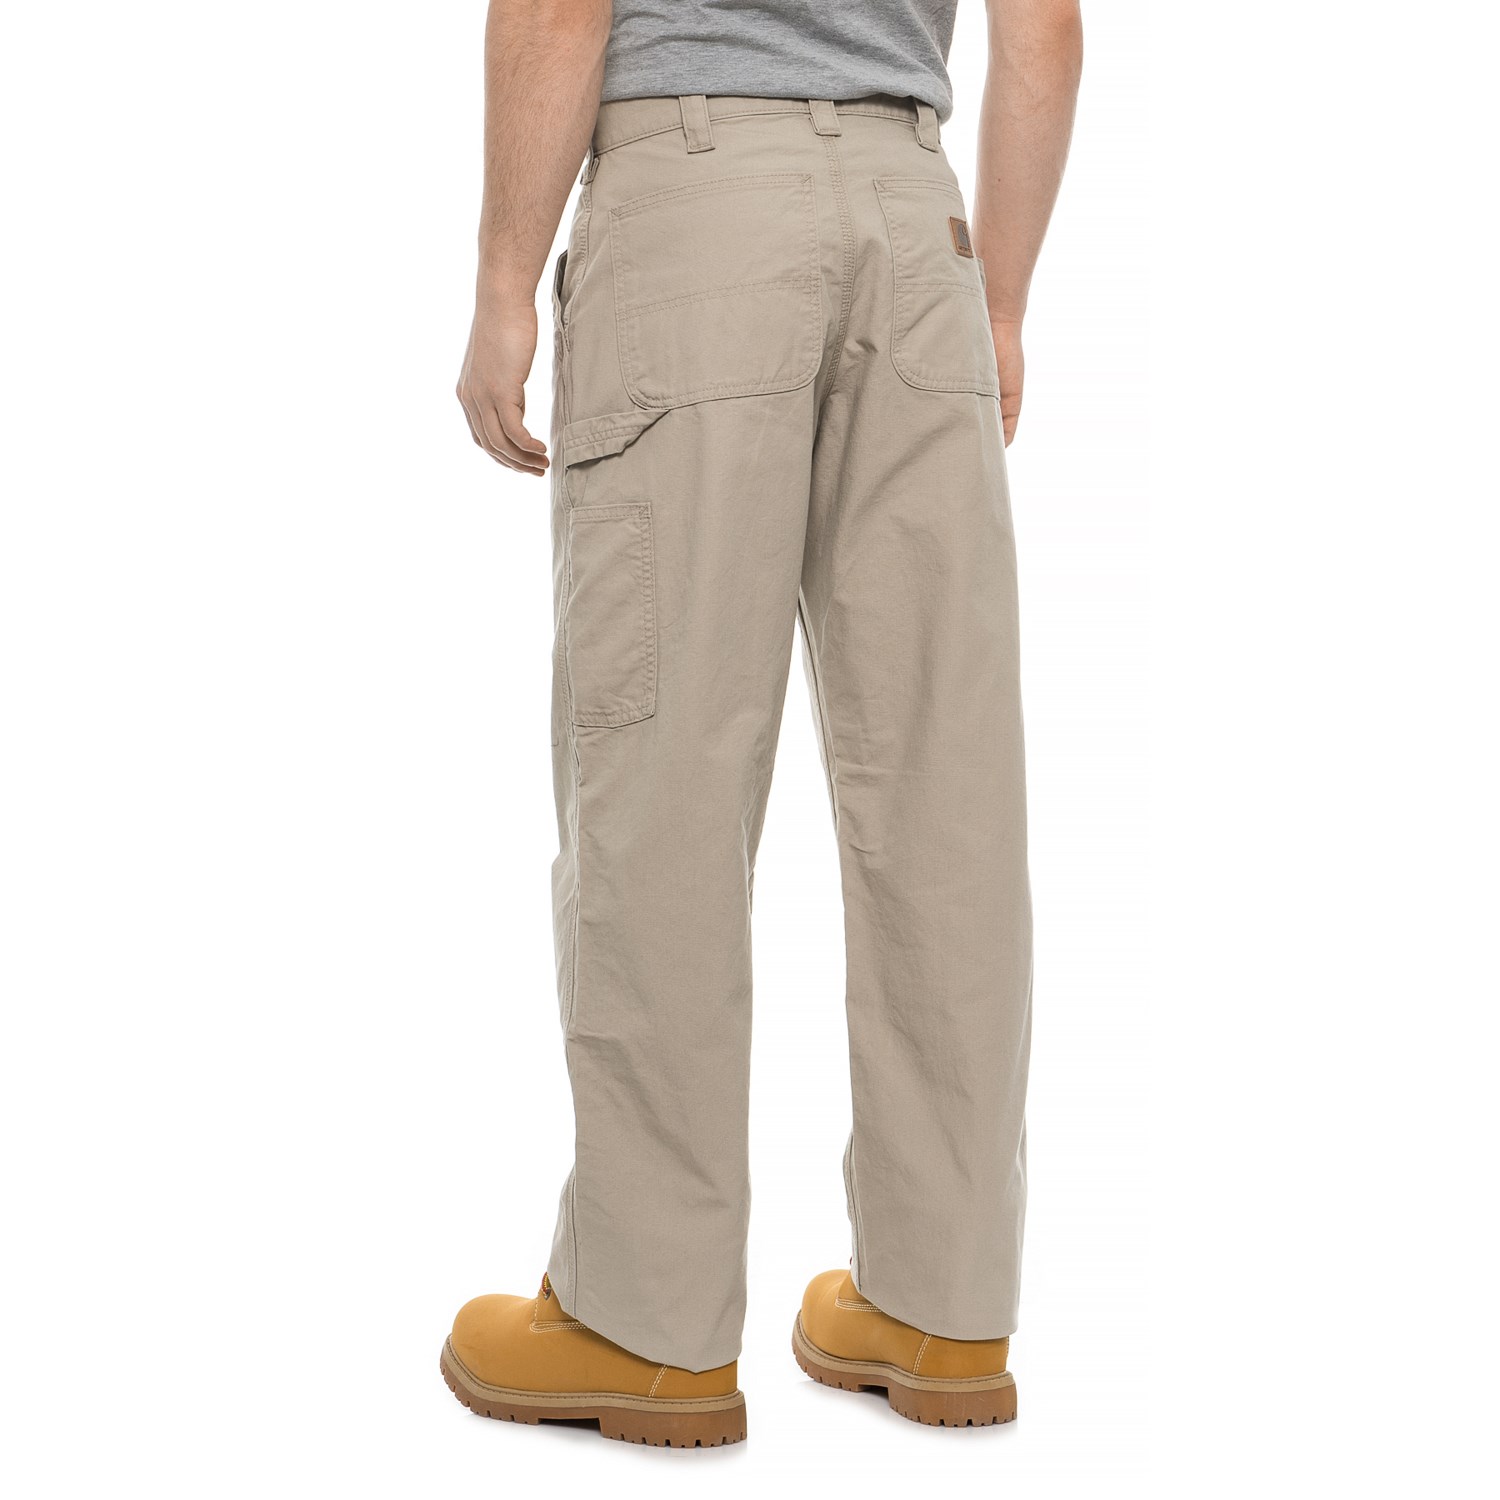 Carhartt B151 Loose Fit Canvas Work Dungaree Pants (For Men)